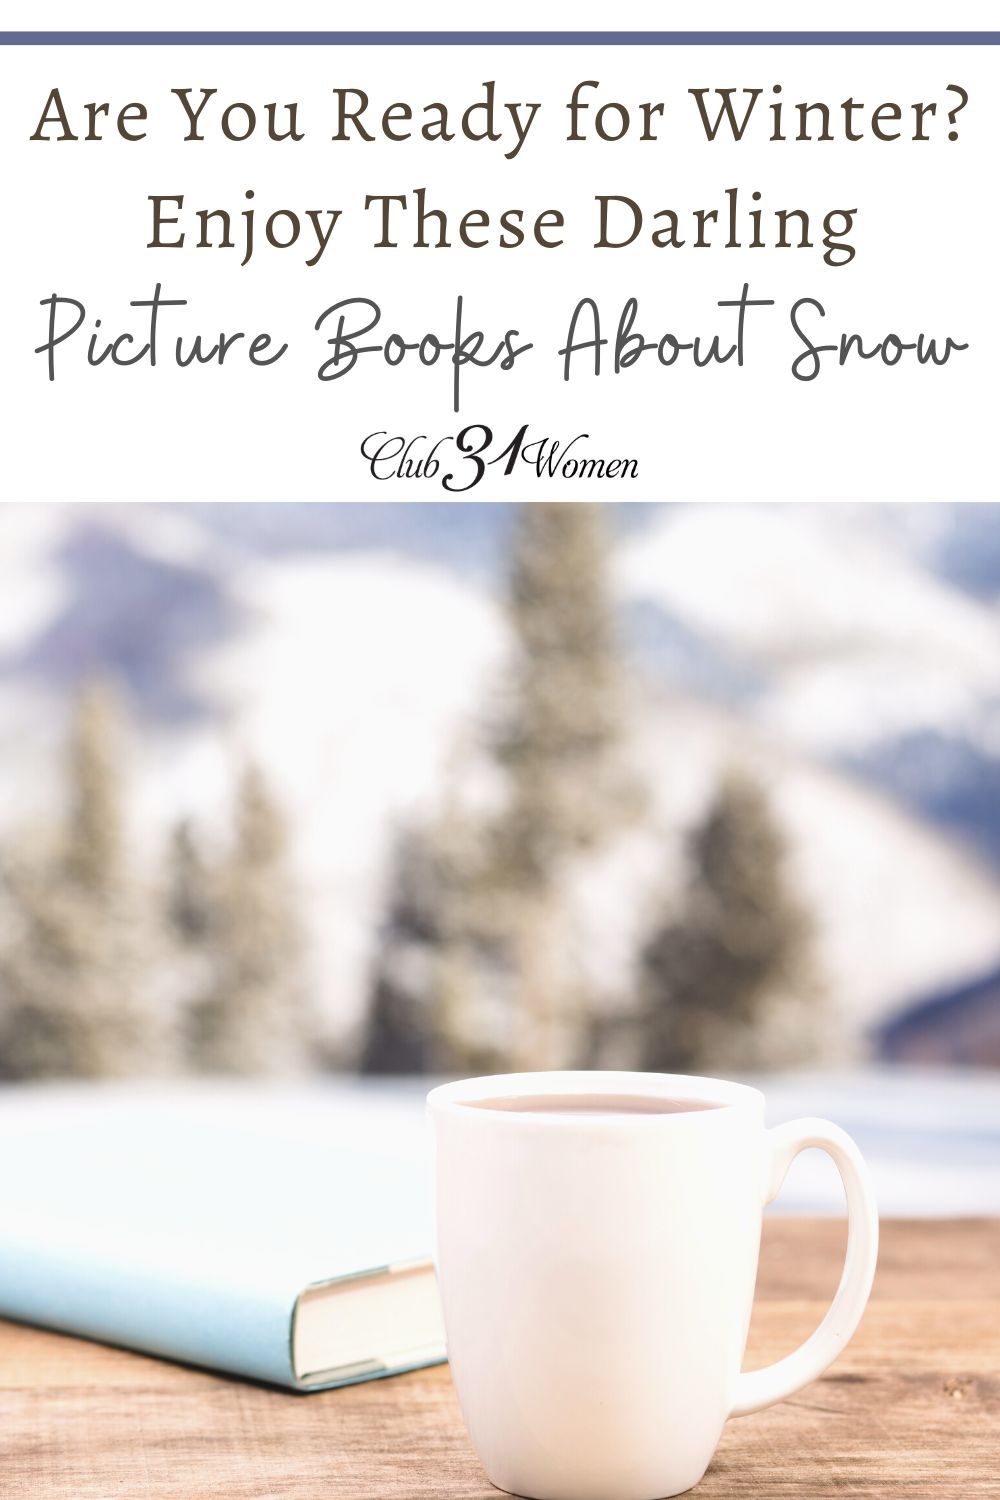 Are You Ready for Winter? Enjoy these darling picture books about snow via @Club31Women